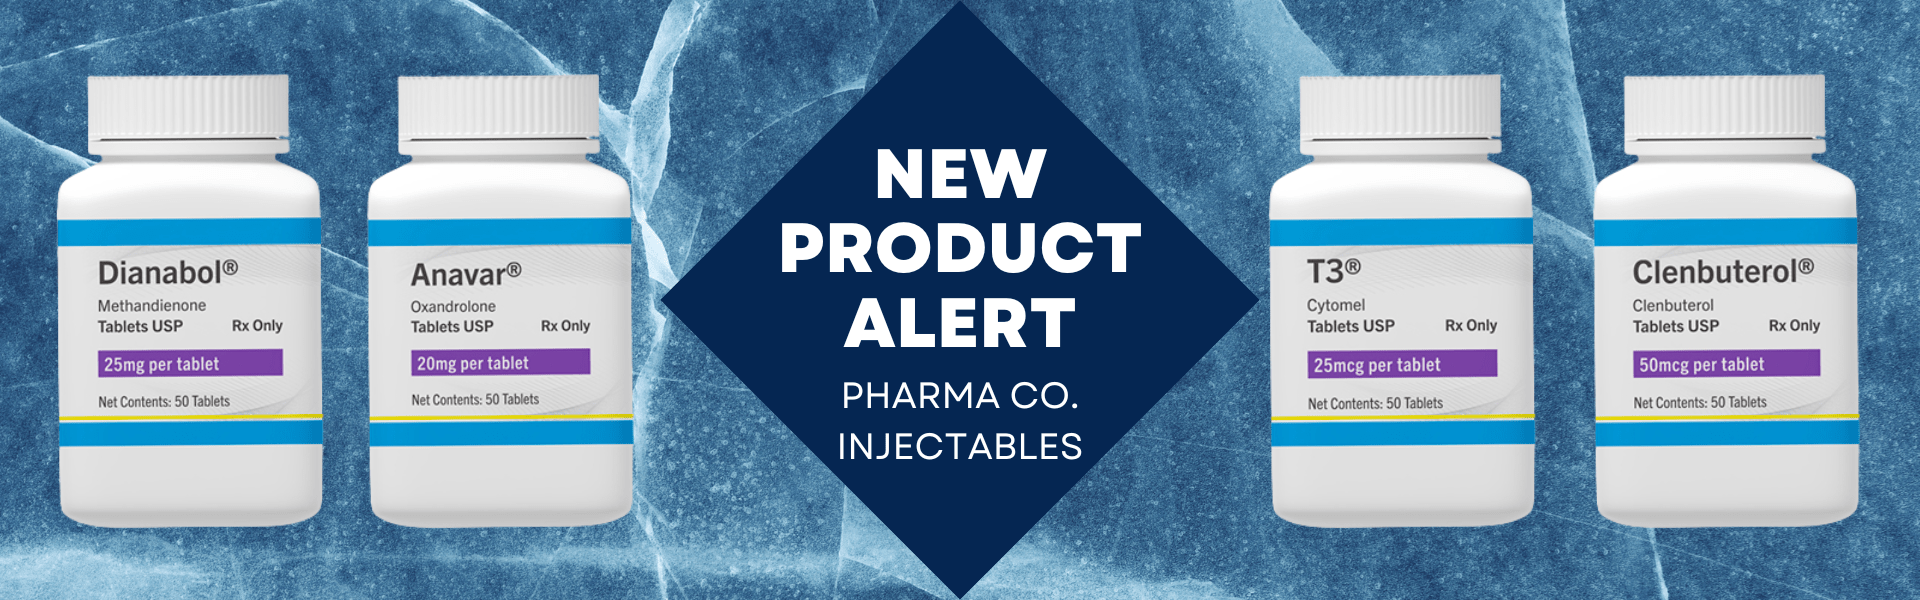 PHARMA CO. INJECTABLES